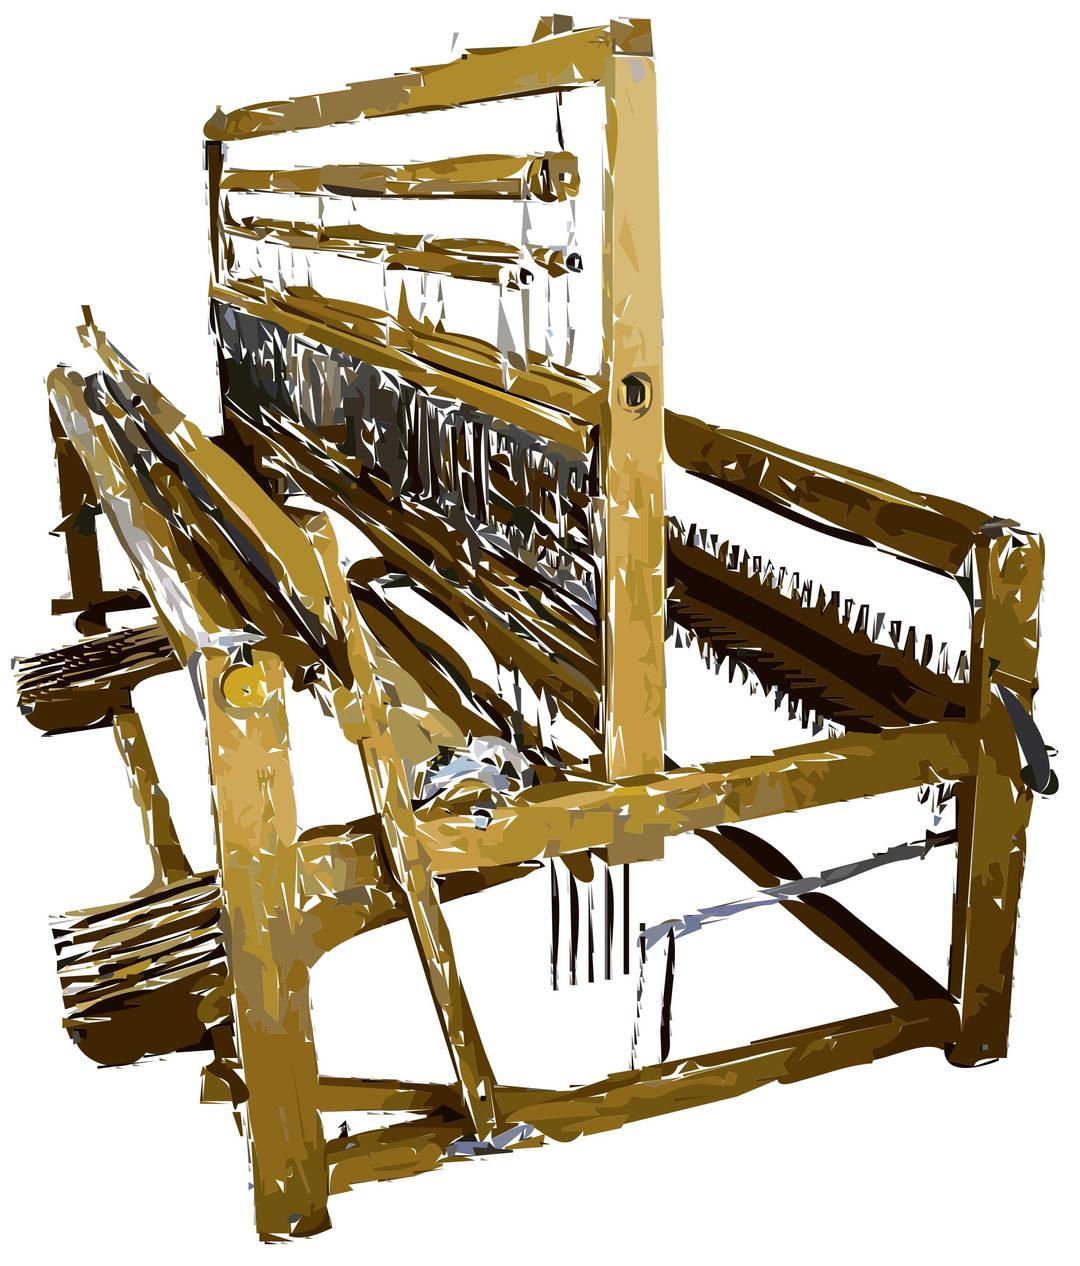 Old Fashioned Fabric Loom Vectorized png transparent